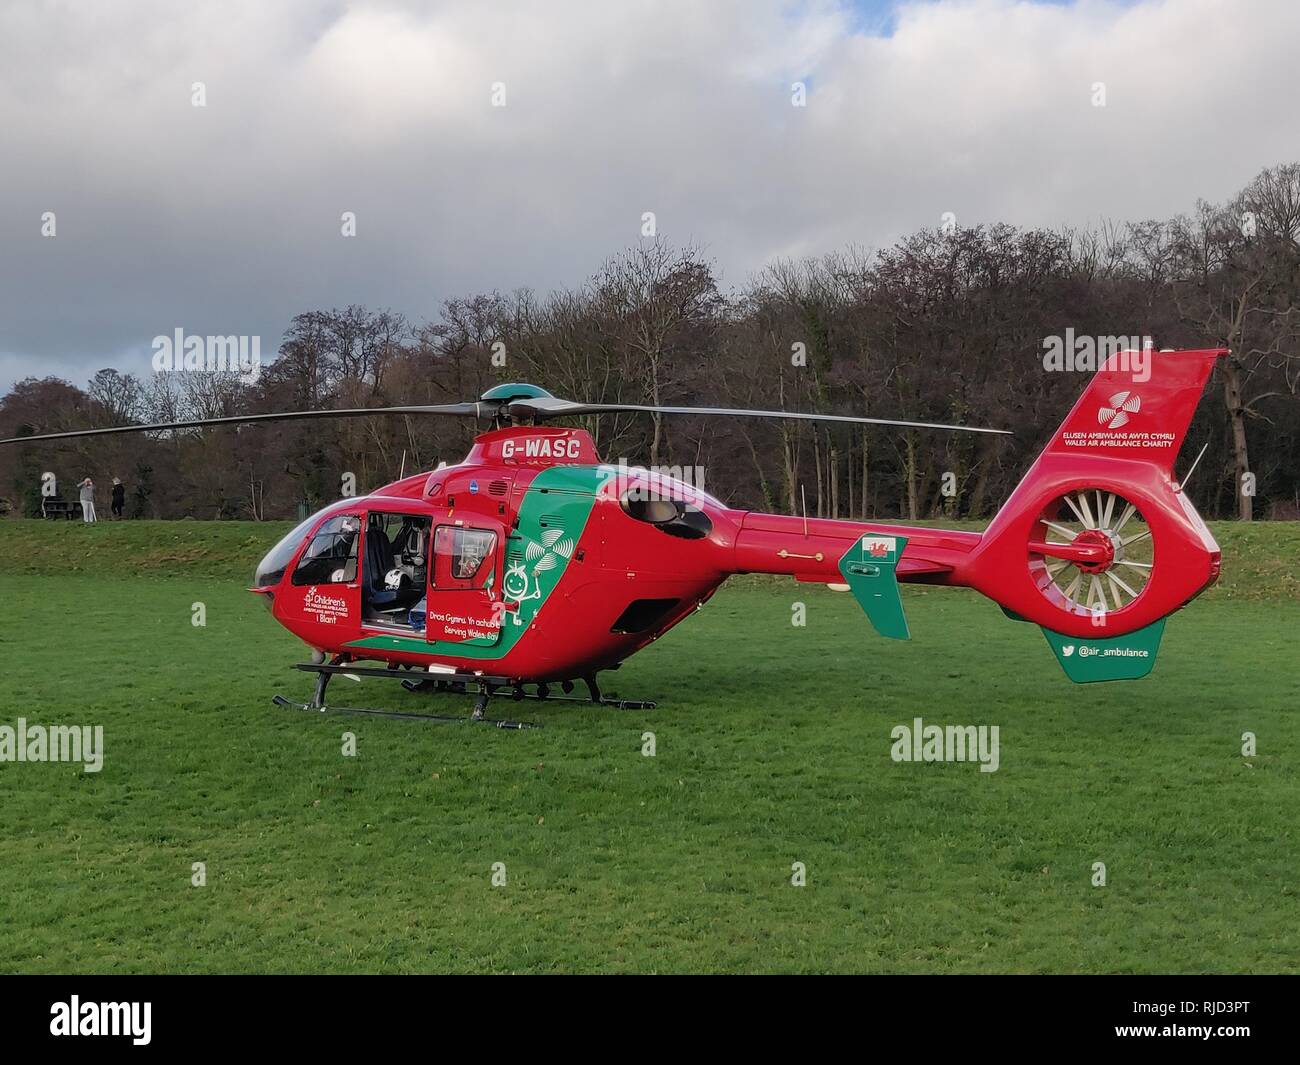 Newport Wales - January 22, 2019, An Airbus EC145 helicopter of the Wales Air Ambulance service after landing in Tredegar park on an emergency call. Stock Photo